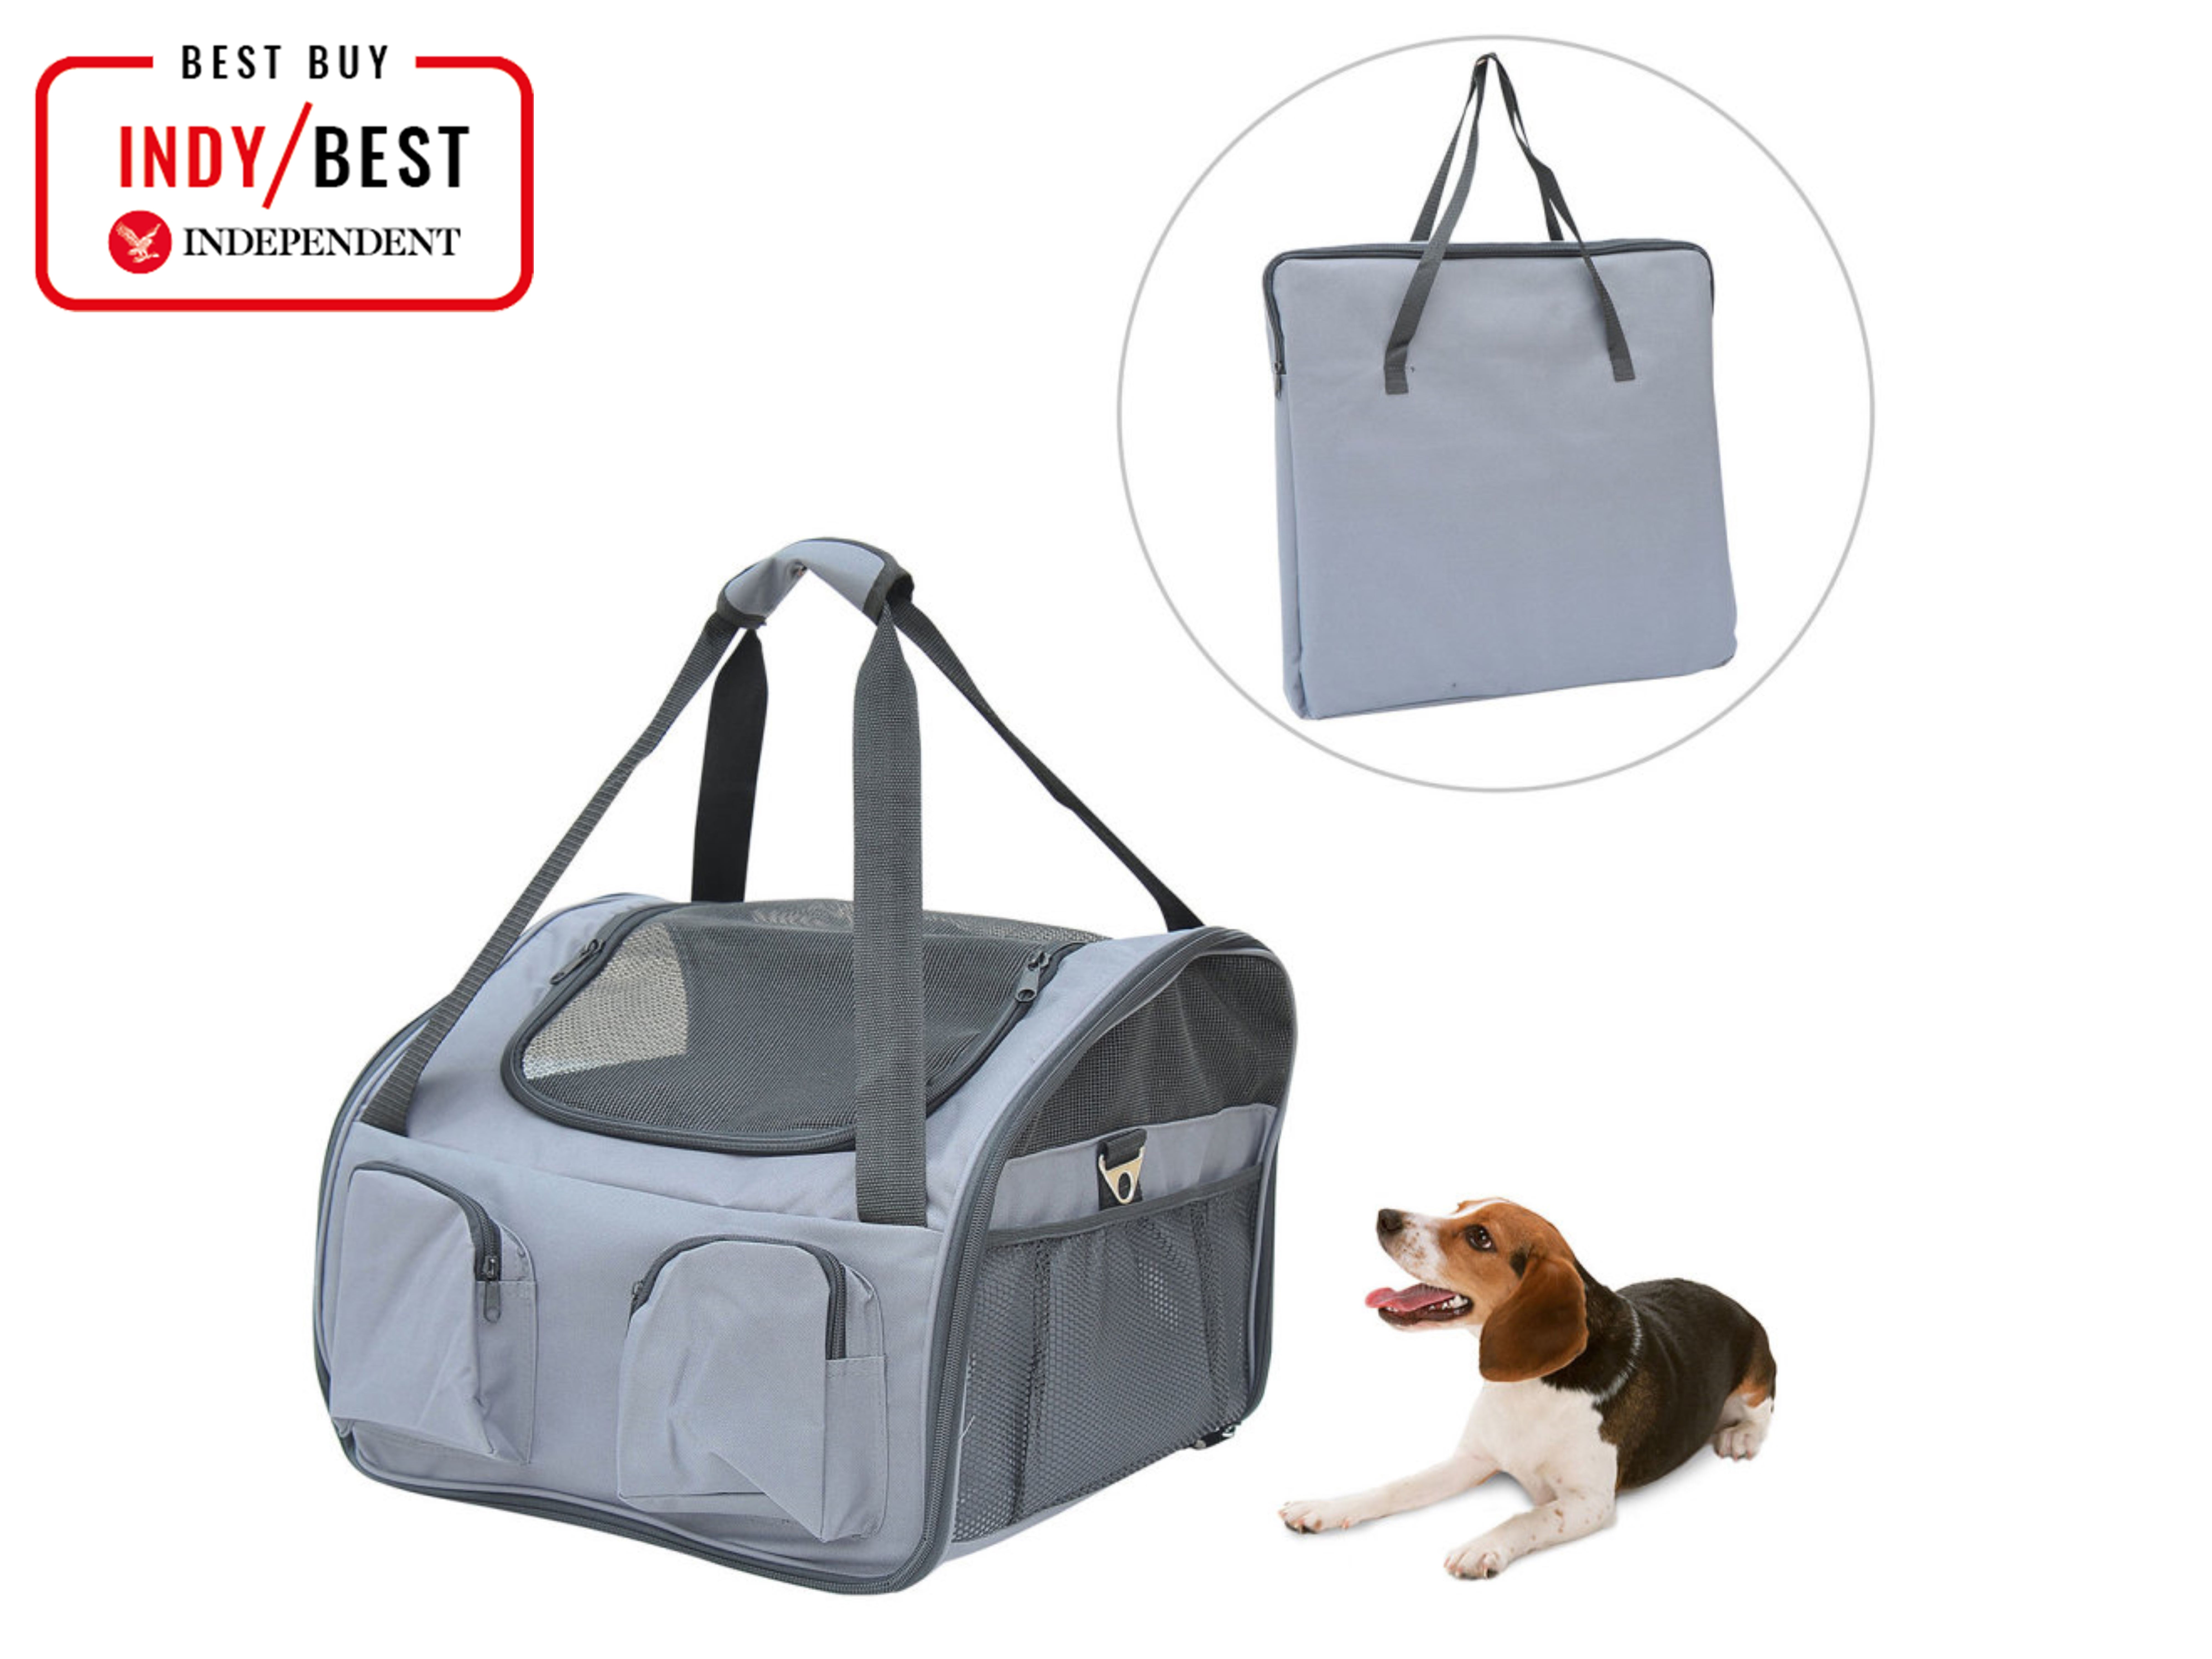 Small Cats & Small Dogs Small Size Kangrow Elegant Soft-Sided Carriers for Kittens Portable Grey Puppies Airline Approved Pet Travel Carrier with Built-in Safety Leash Foldable & Washable 